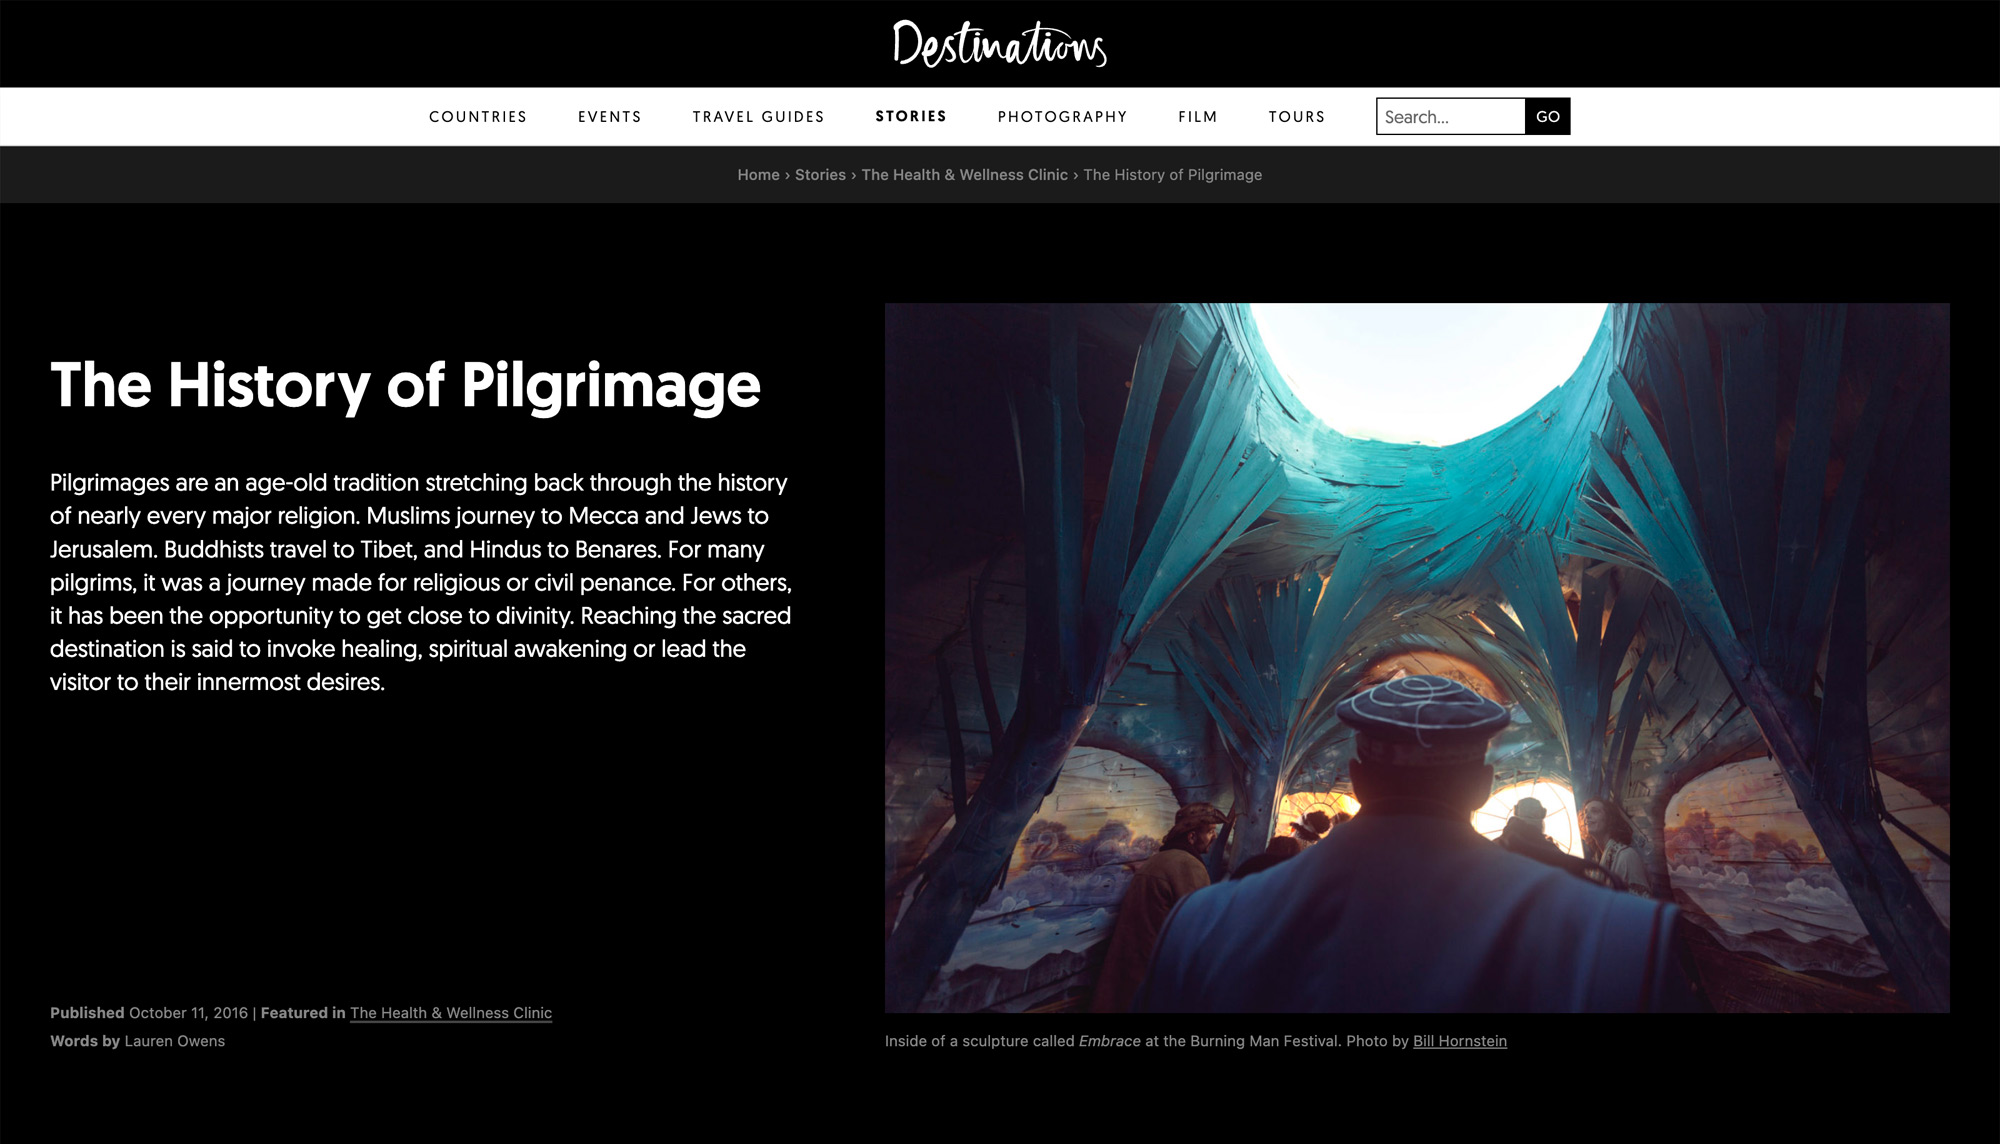 Screenshot of the header area of an article. It shows the content on the left, including the headline "The History of Pilgrimage". On the right of the header is a large photo of a sculpture at the Burning Man Festival.